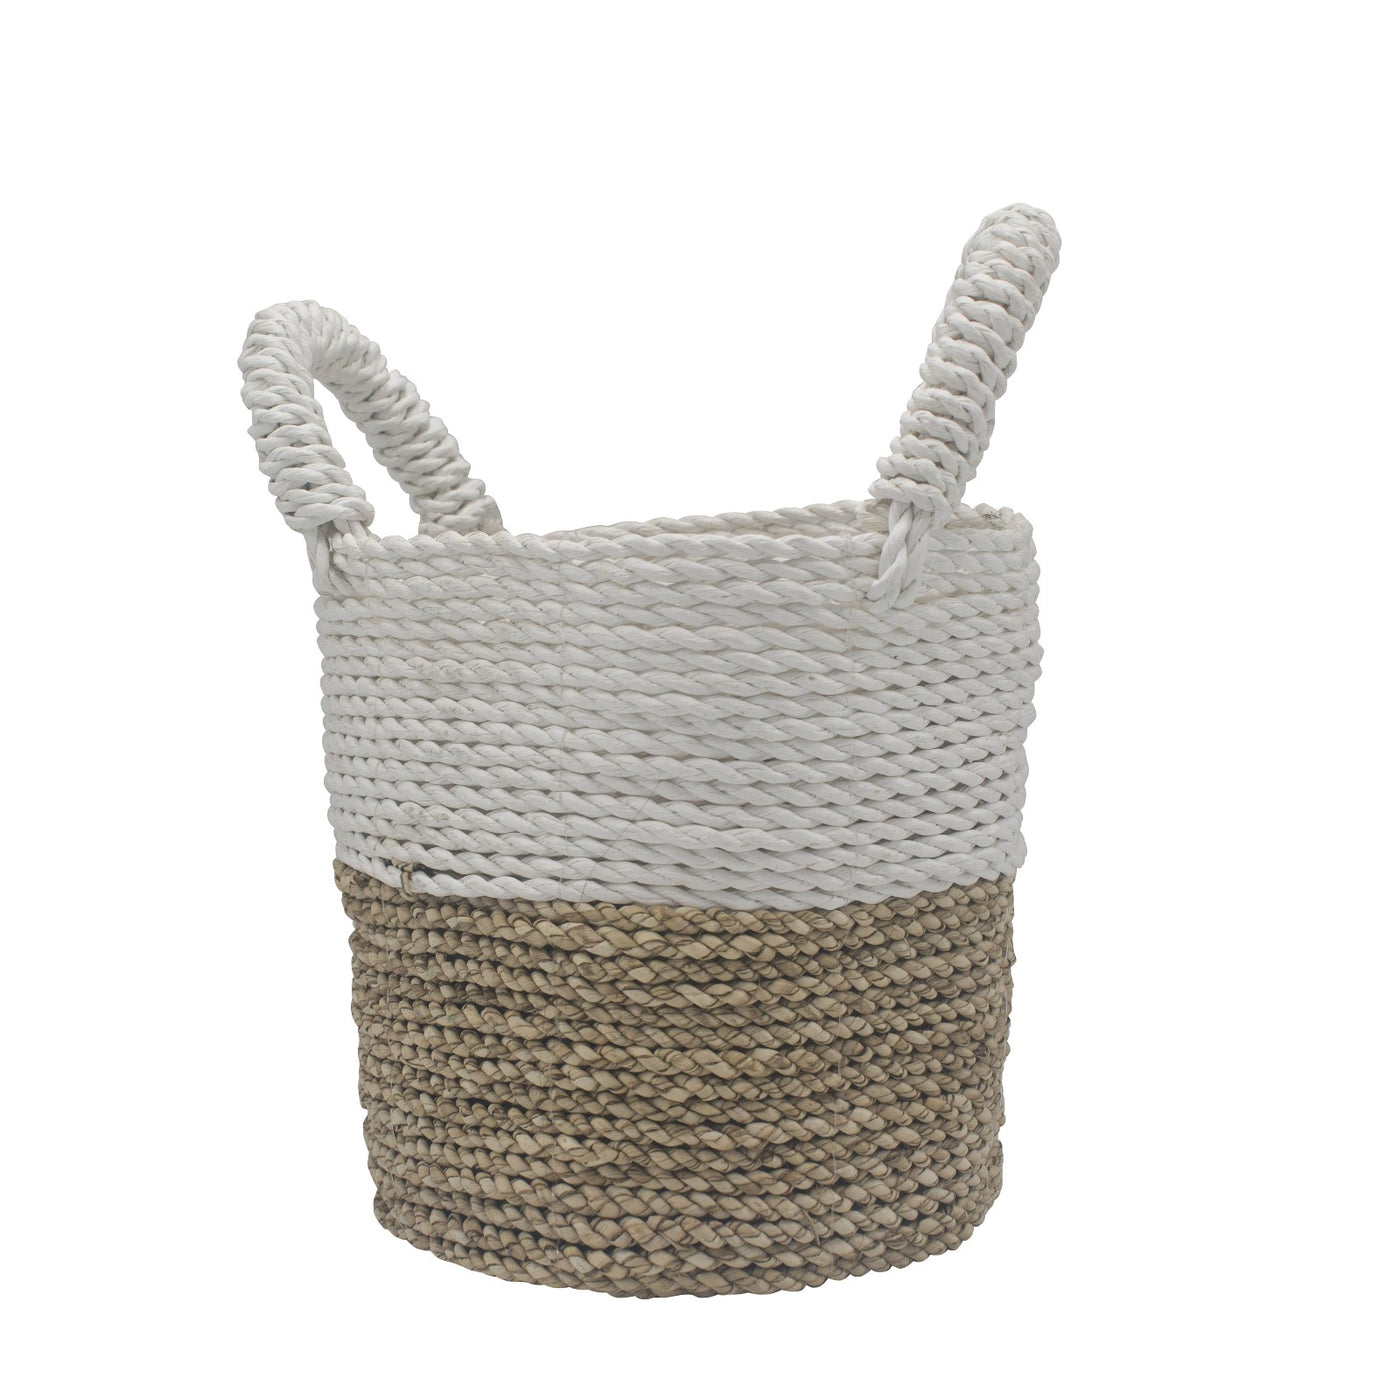 Set Of 3 Natural And White Round Seagrass Baskets.#